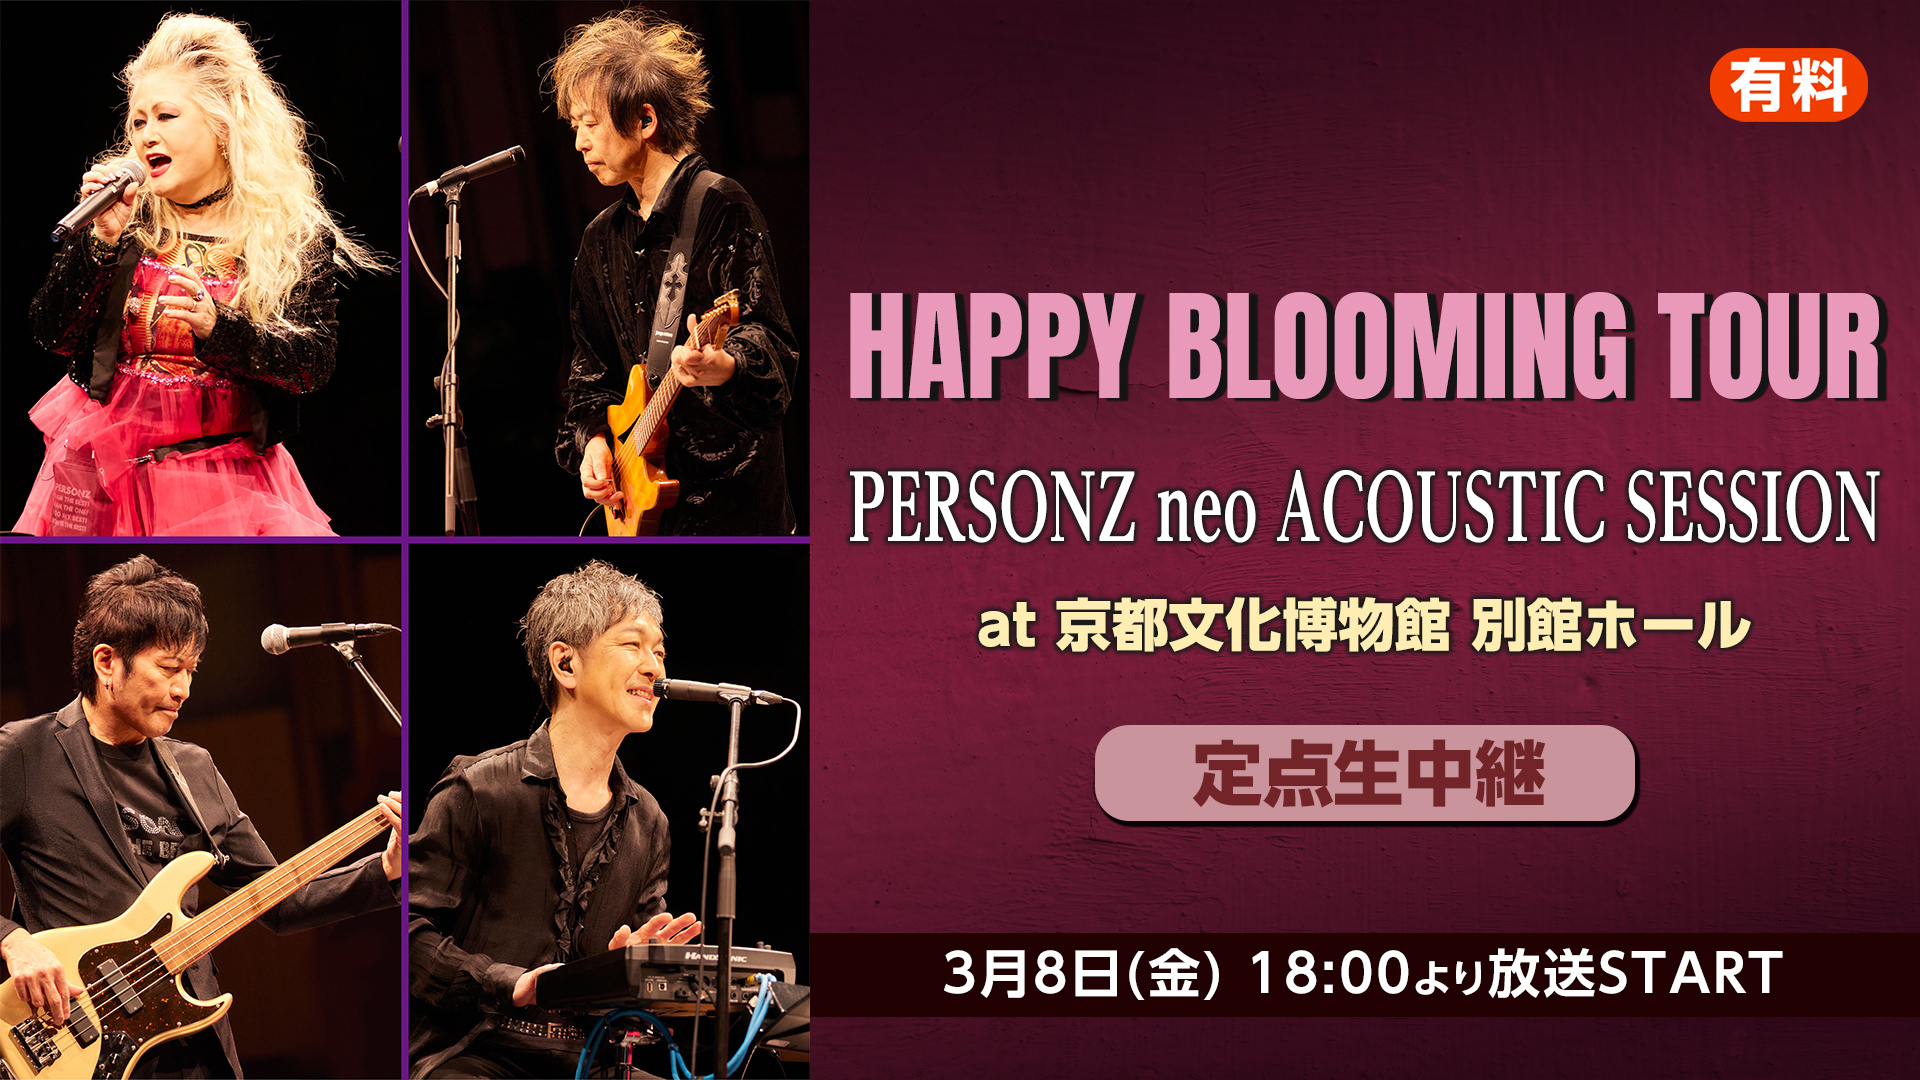 PERSONZ neo ACOUSTIC SESSION at 京都文化博物館 別館ホール【定点生中継】